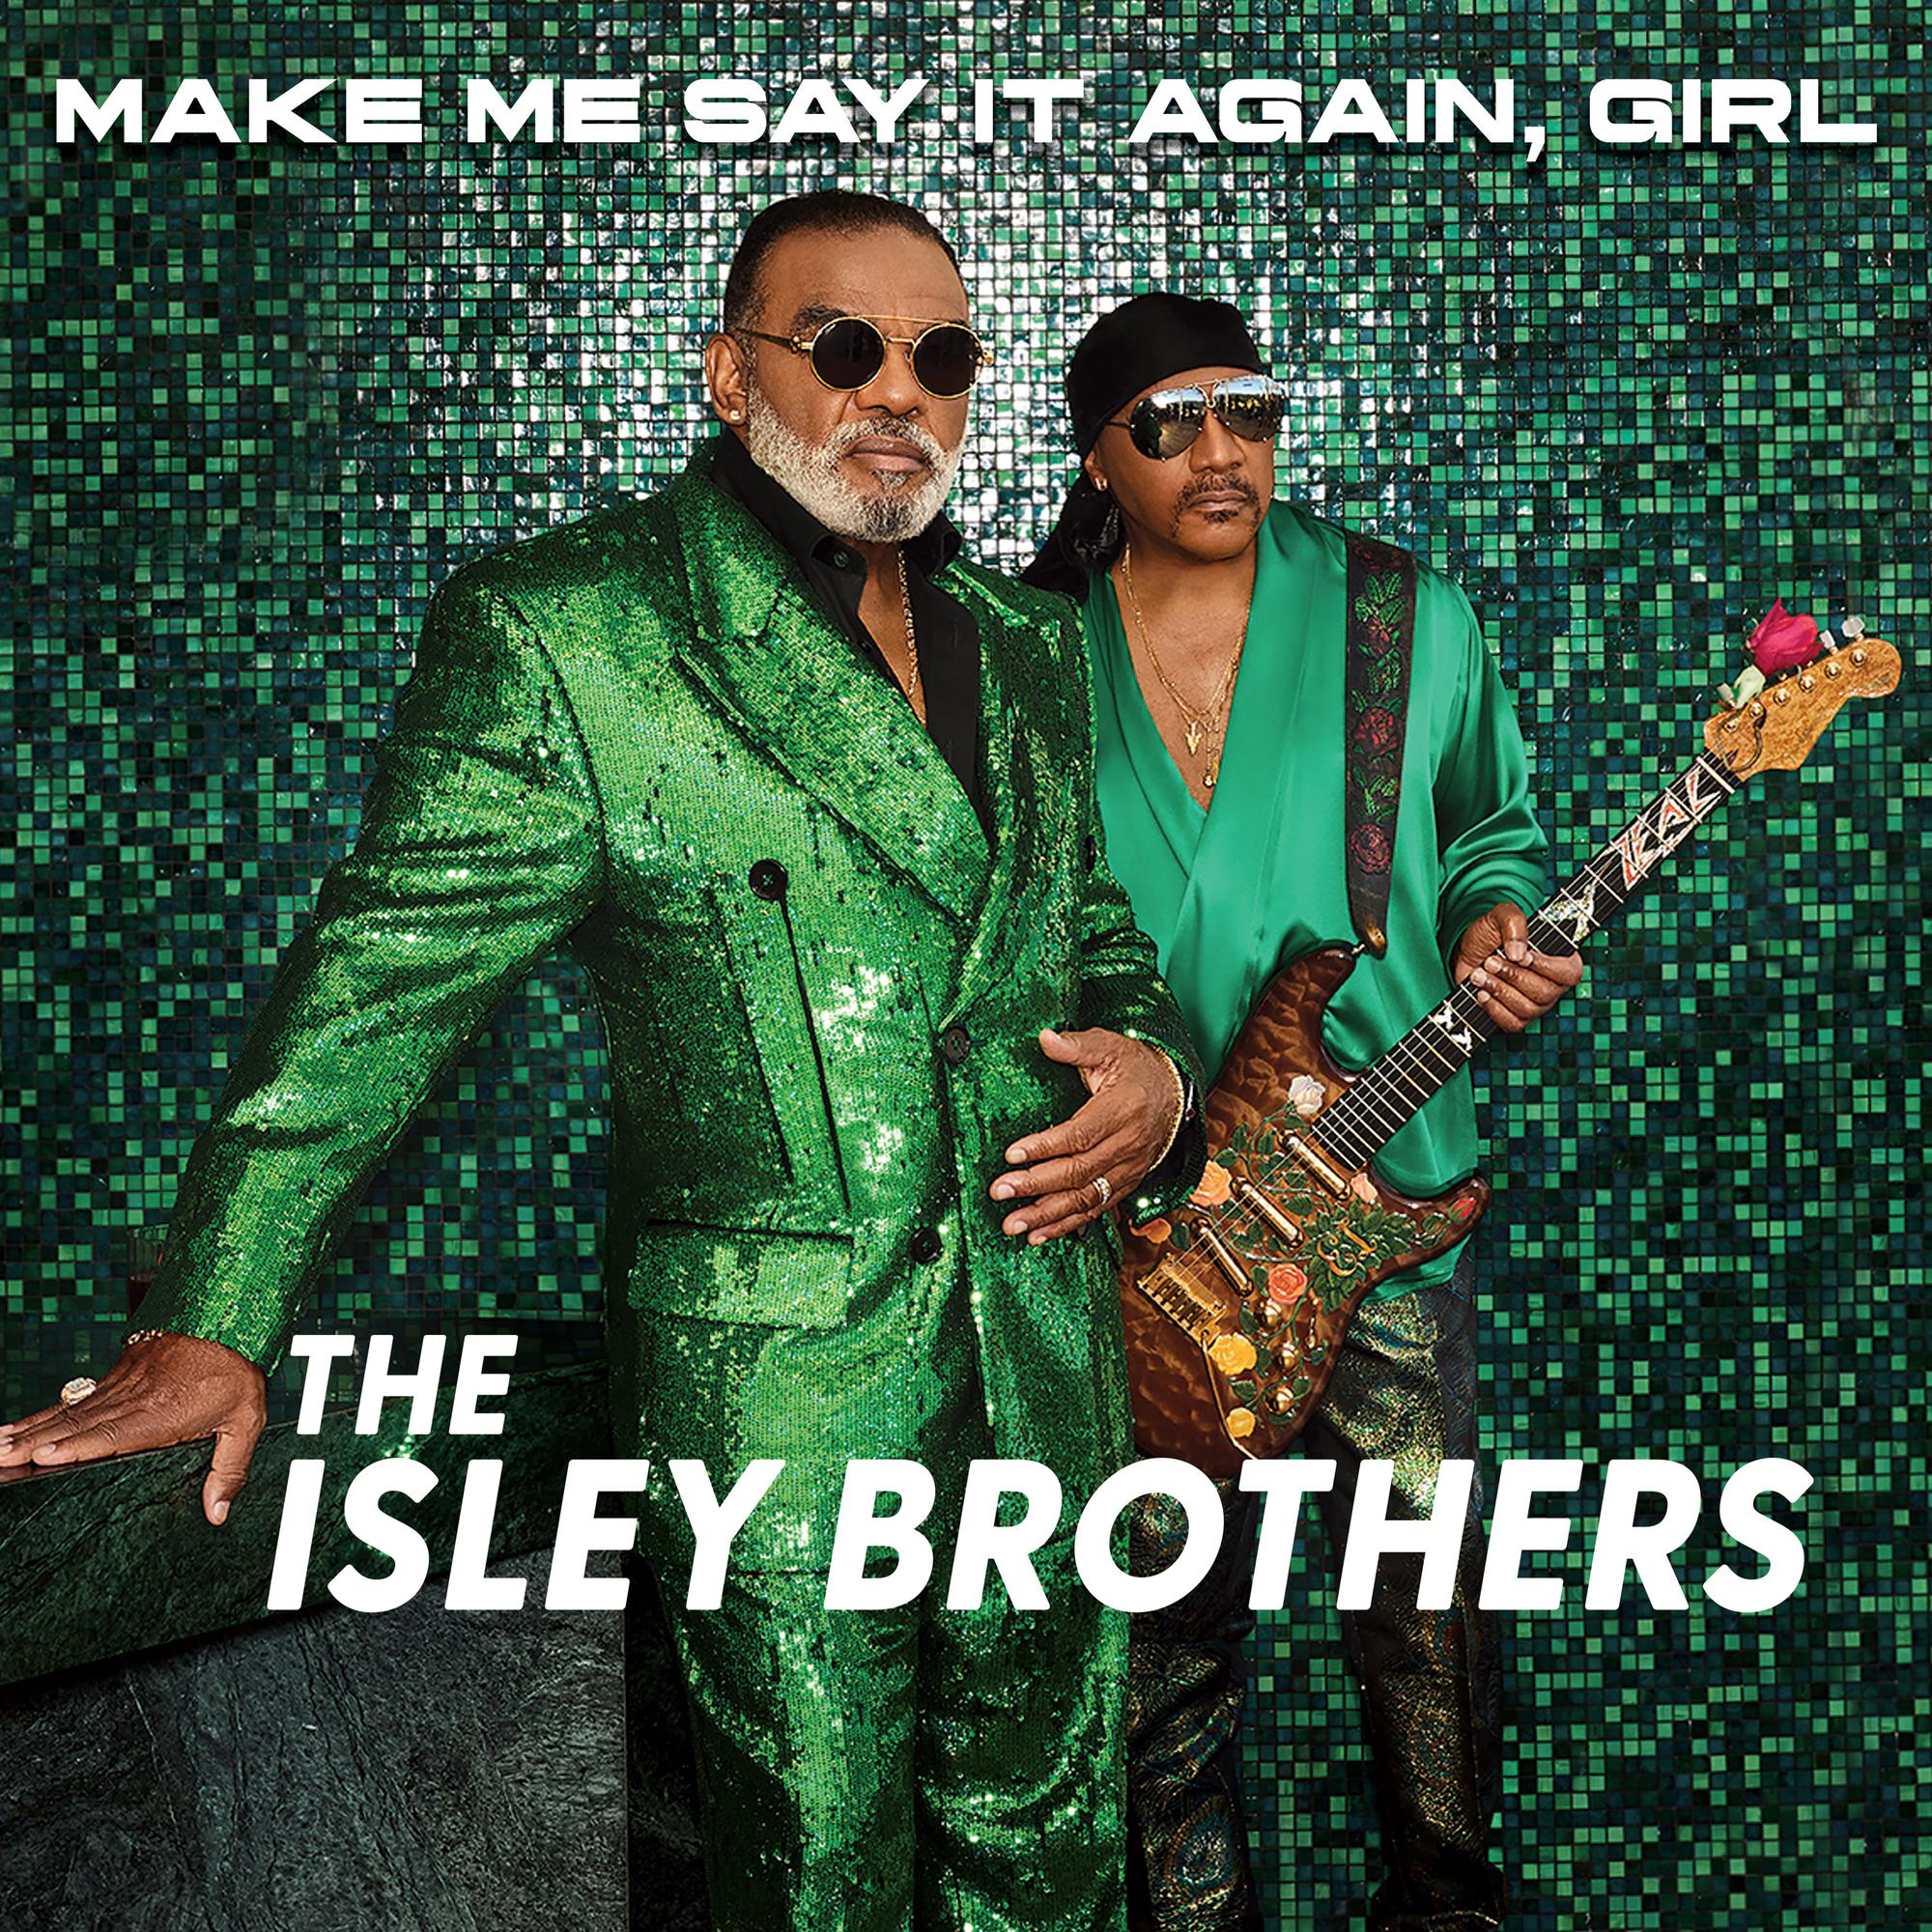 The Isley Brothers- Make Me Say It Again, Girl (Green Vinyl) - Darkside Records